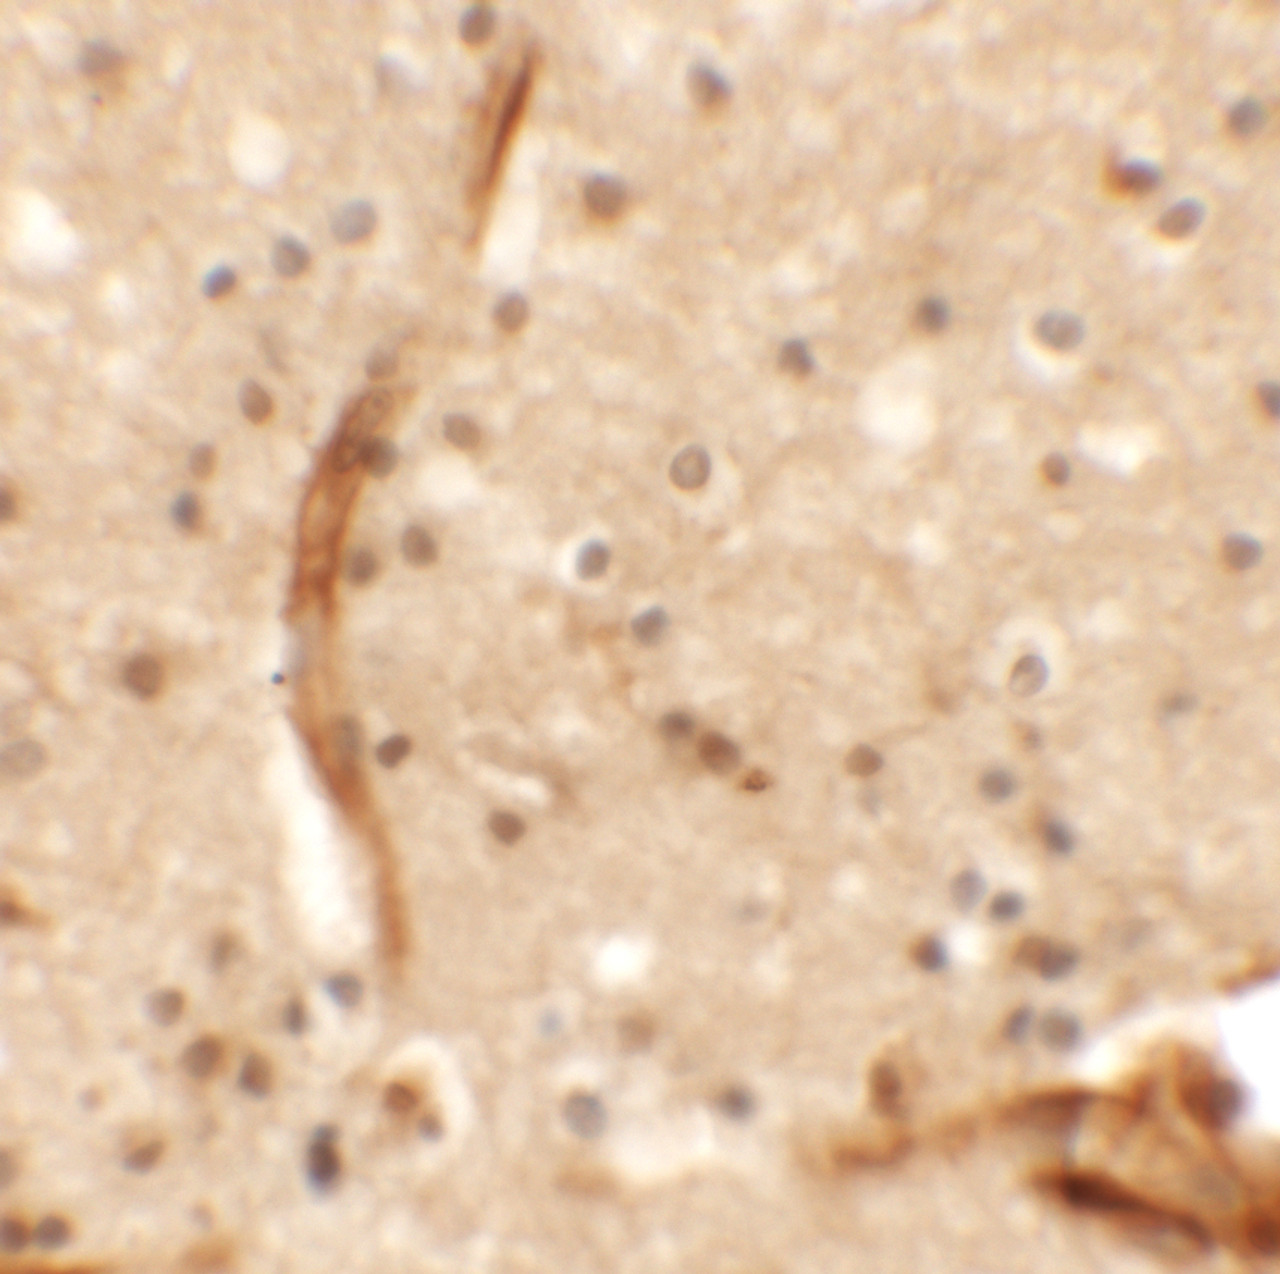 Immunohistochemistry of KCNK13 in human brain tissue with KCNK13 antibody at 5 ug/mL.